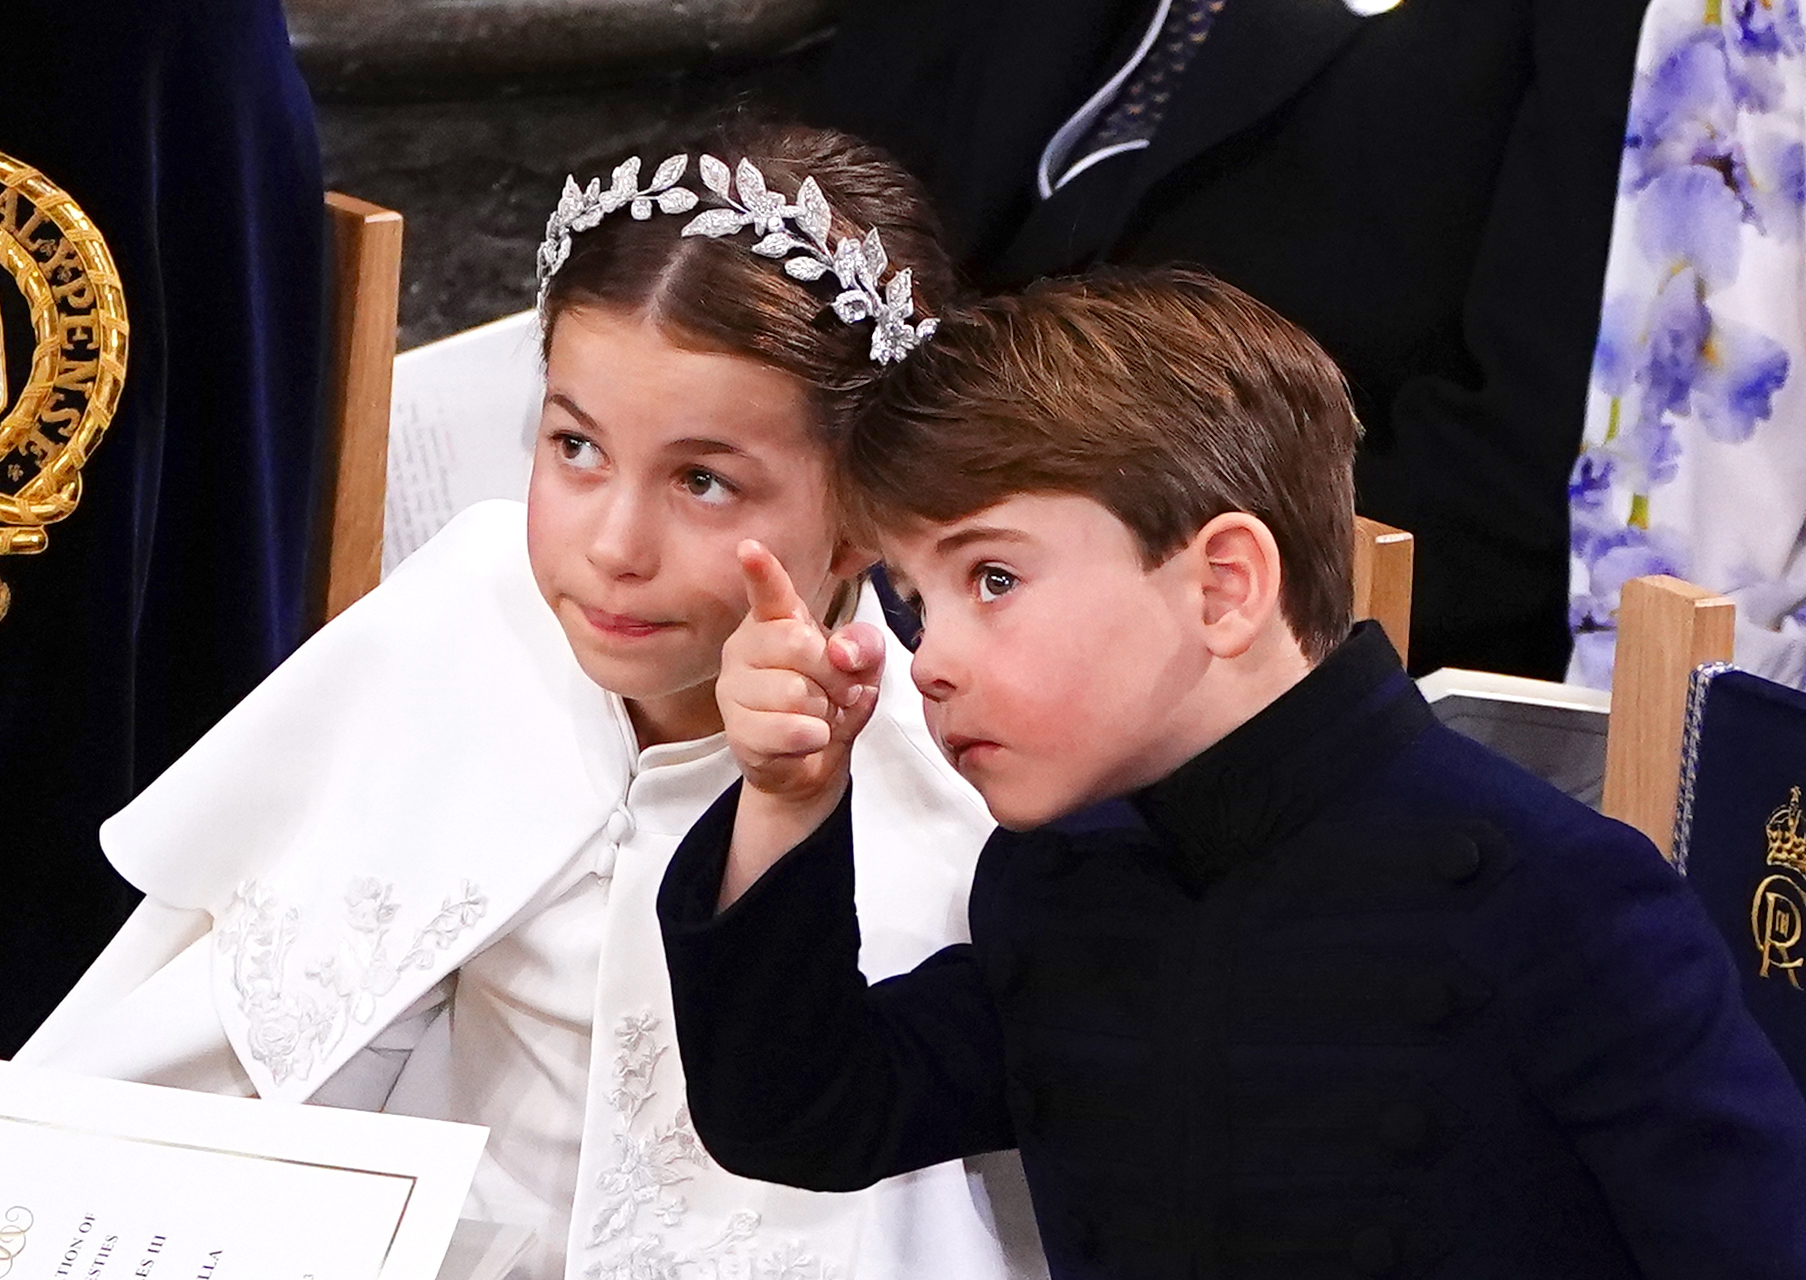 <p>Prince Louis pointed out something to sister Princess Charlotte during <a href="https://www.wonderwall.com/celebrity/the-coronation-of-king-charles-iii-and-queen-camilla-the-best-pictures-of-all-the-royals-at-this-historic-event-735015.gallery">the coronation ceremony</a> of King Charles III and Queen Camilla in Westminster Abbey in London on May 6, 2023.</p><p>MORE: <a href="https://www.wonderwall.com/celebrity/royals/duchess-camilla-parker-bowles-prince-charles-queen-consort-wife-best-photos-622676.gallery">See the best photos of the newly titled Queen Consort Camilla since her marriage to King Charles III</a></p>